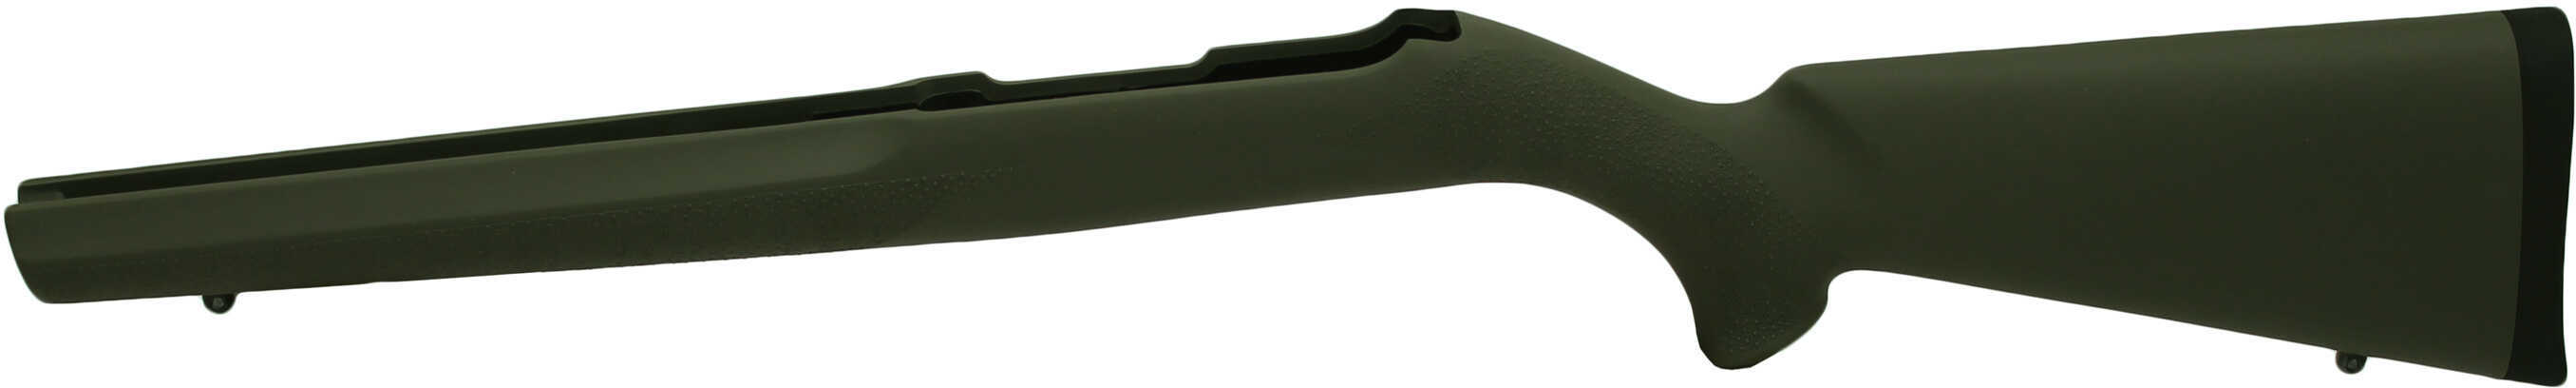 Hogue 10/22 Overmolded Stock Rubber, Standard Barrel, Olive Drab Green 22200